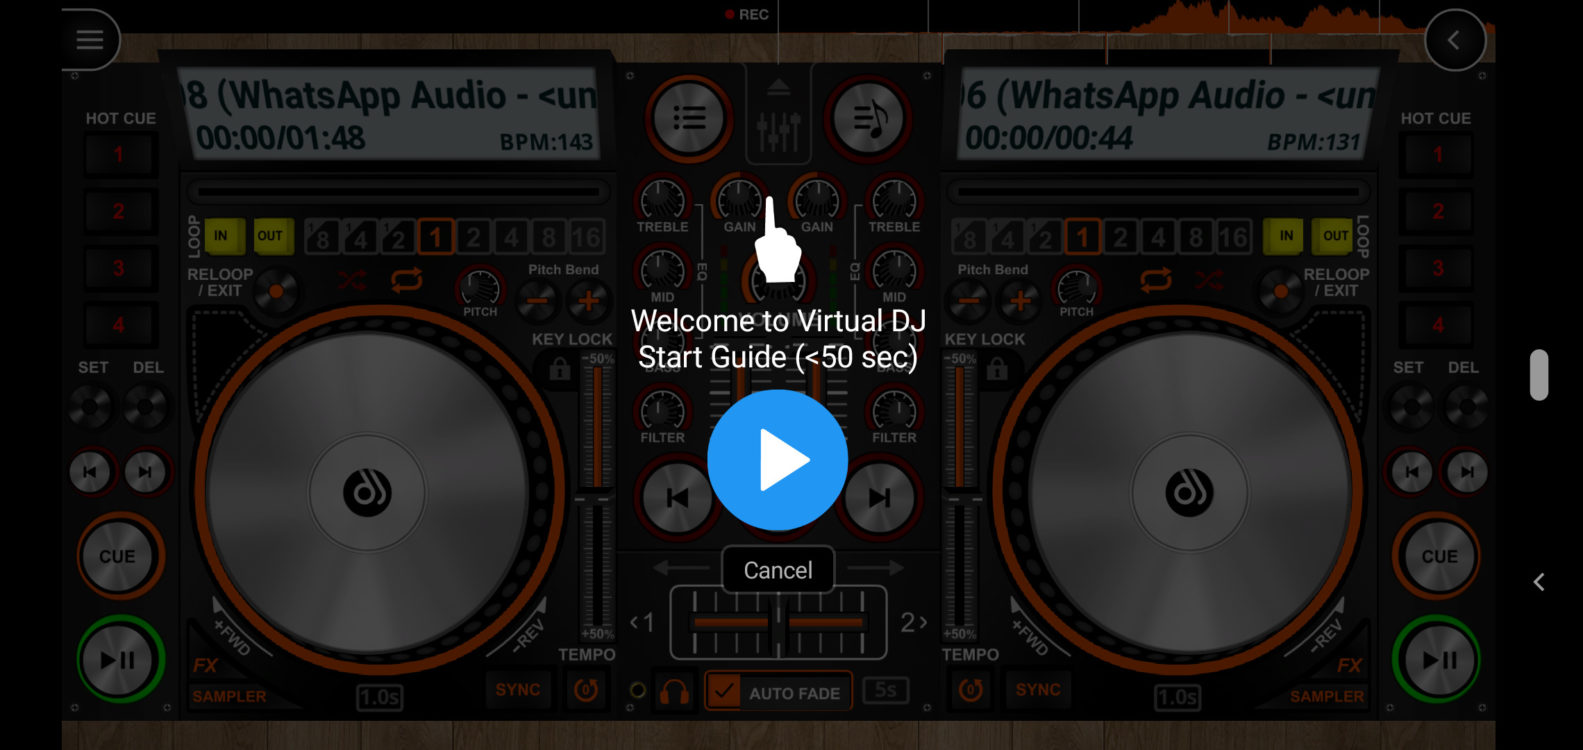 virtual dj for android free download apk